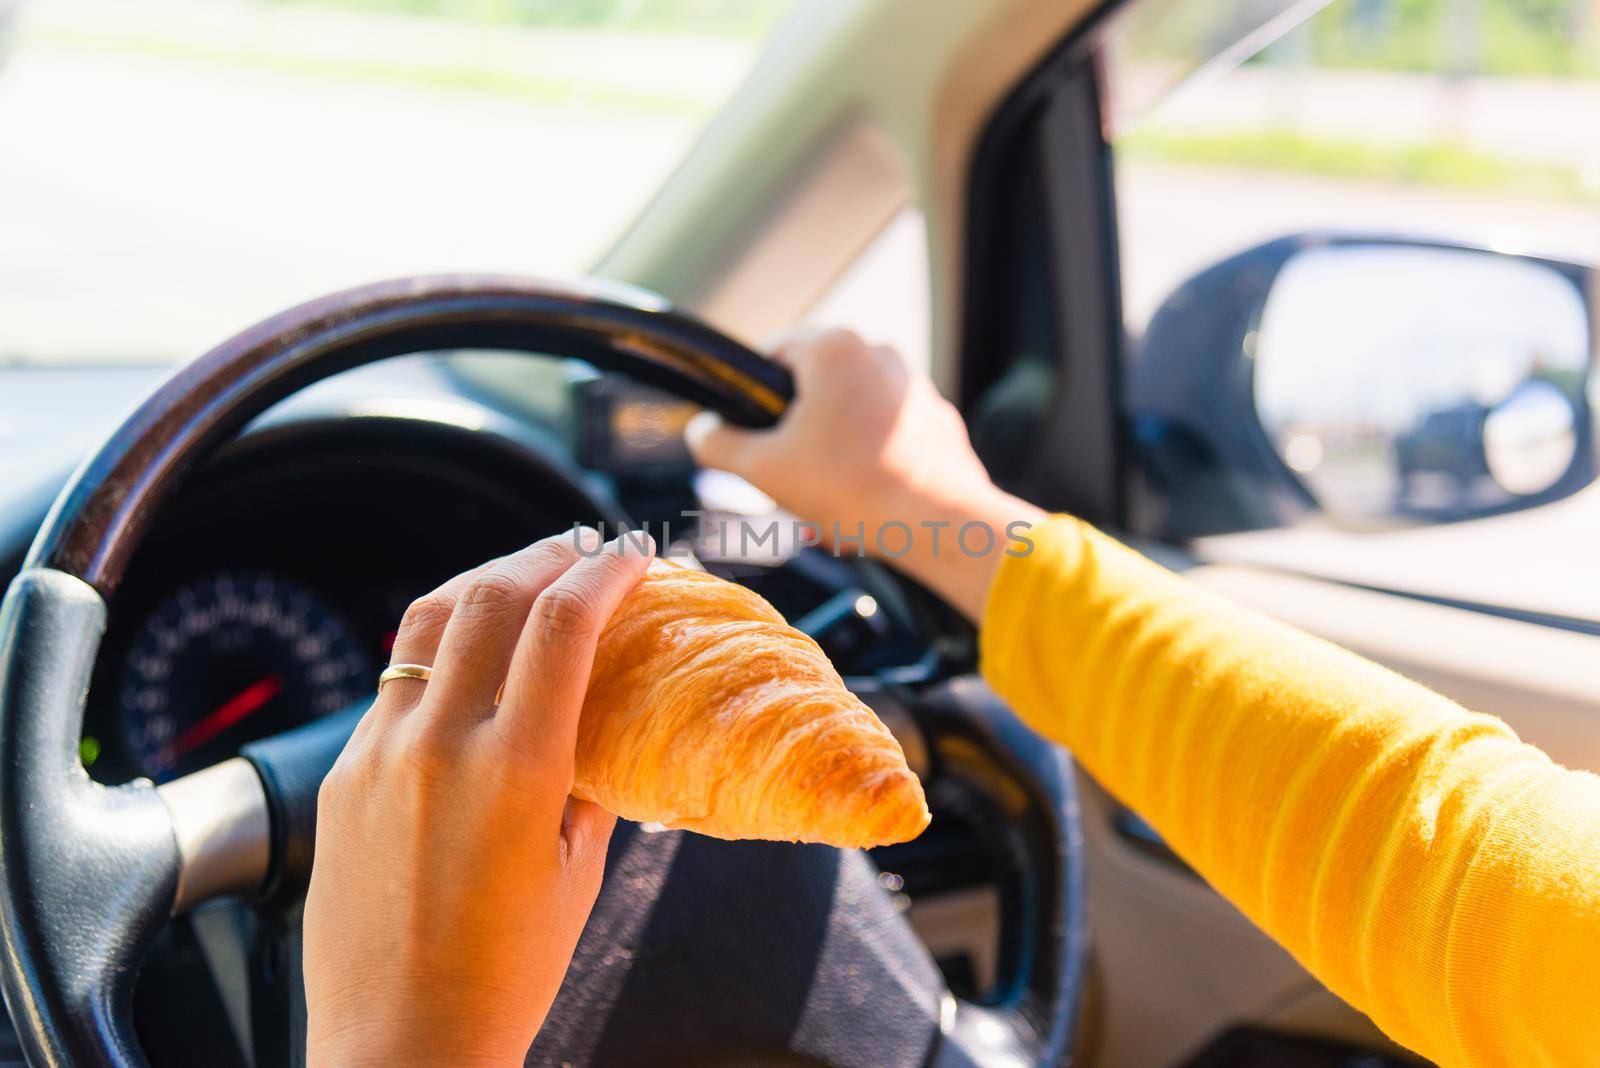 Asian woman eating food fastfood while driving the car in the morning during going to work on highway road, Transportation and vehicle concept